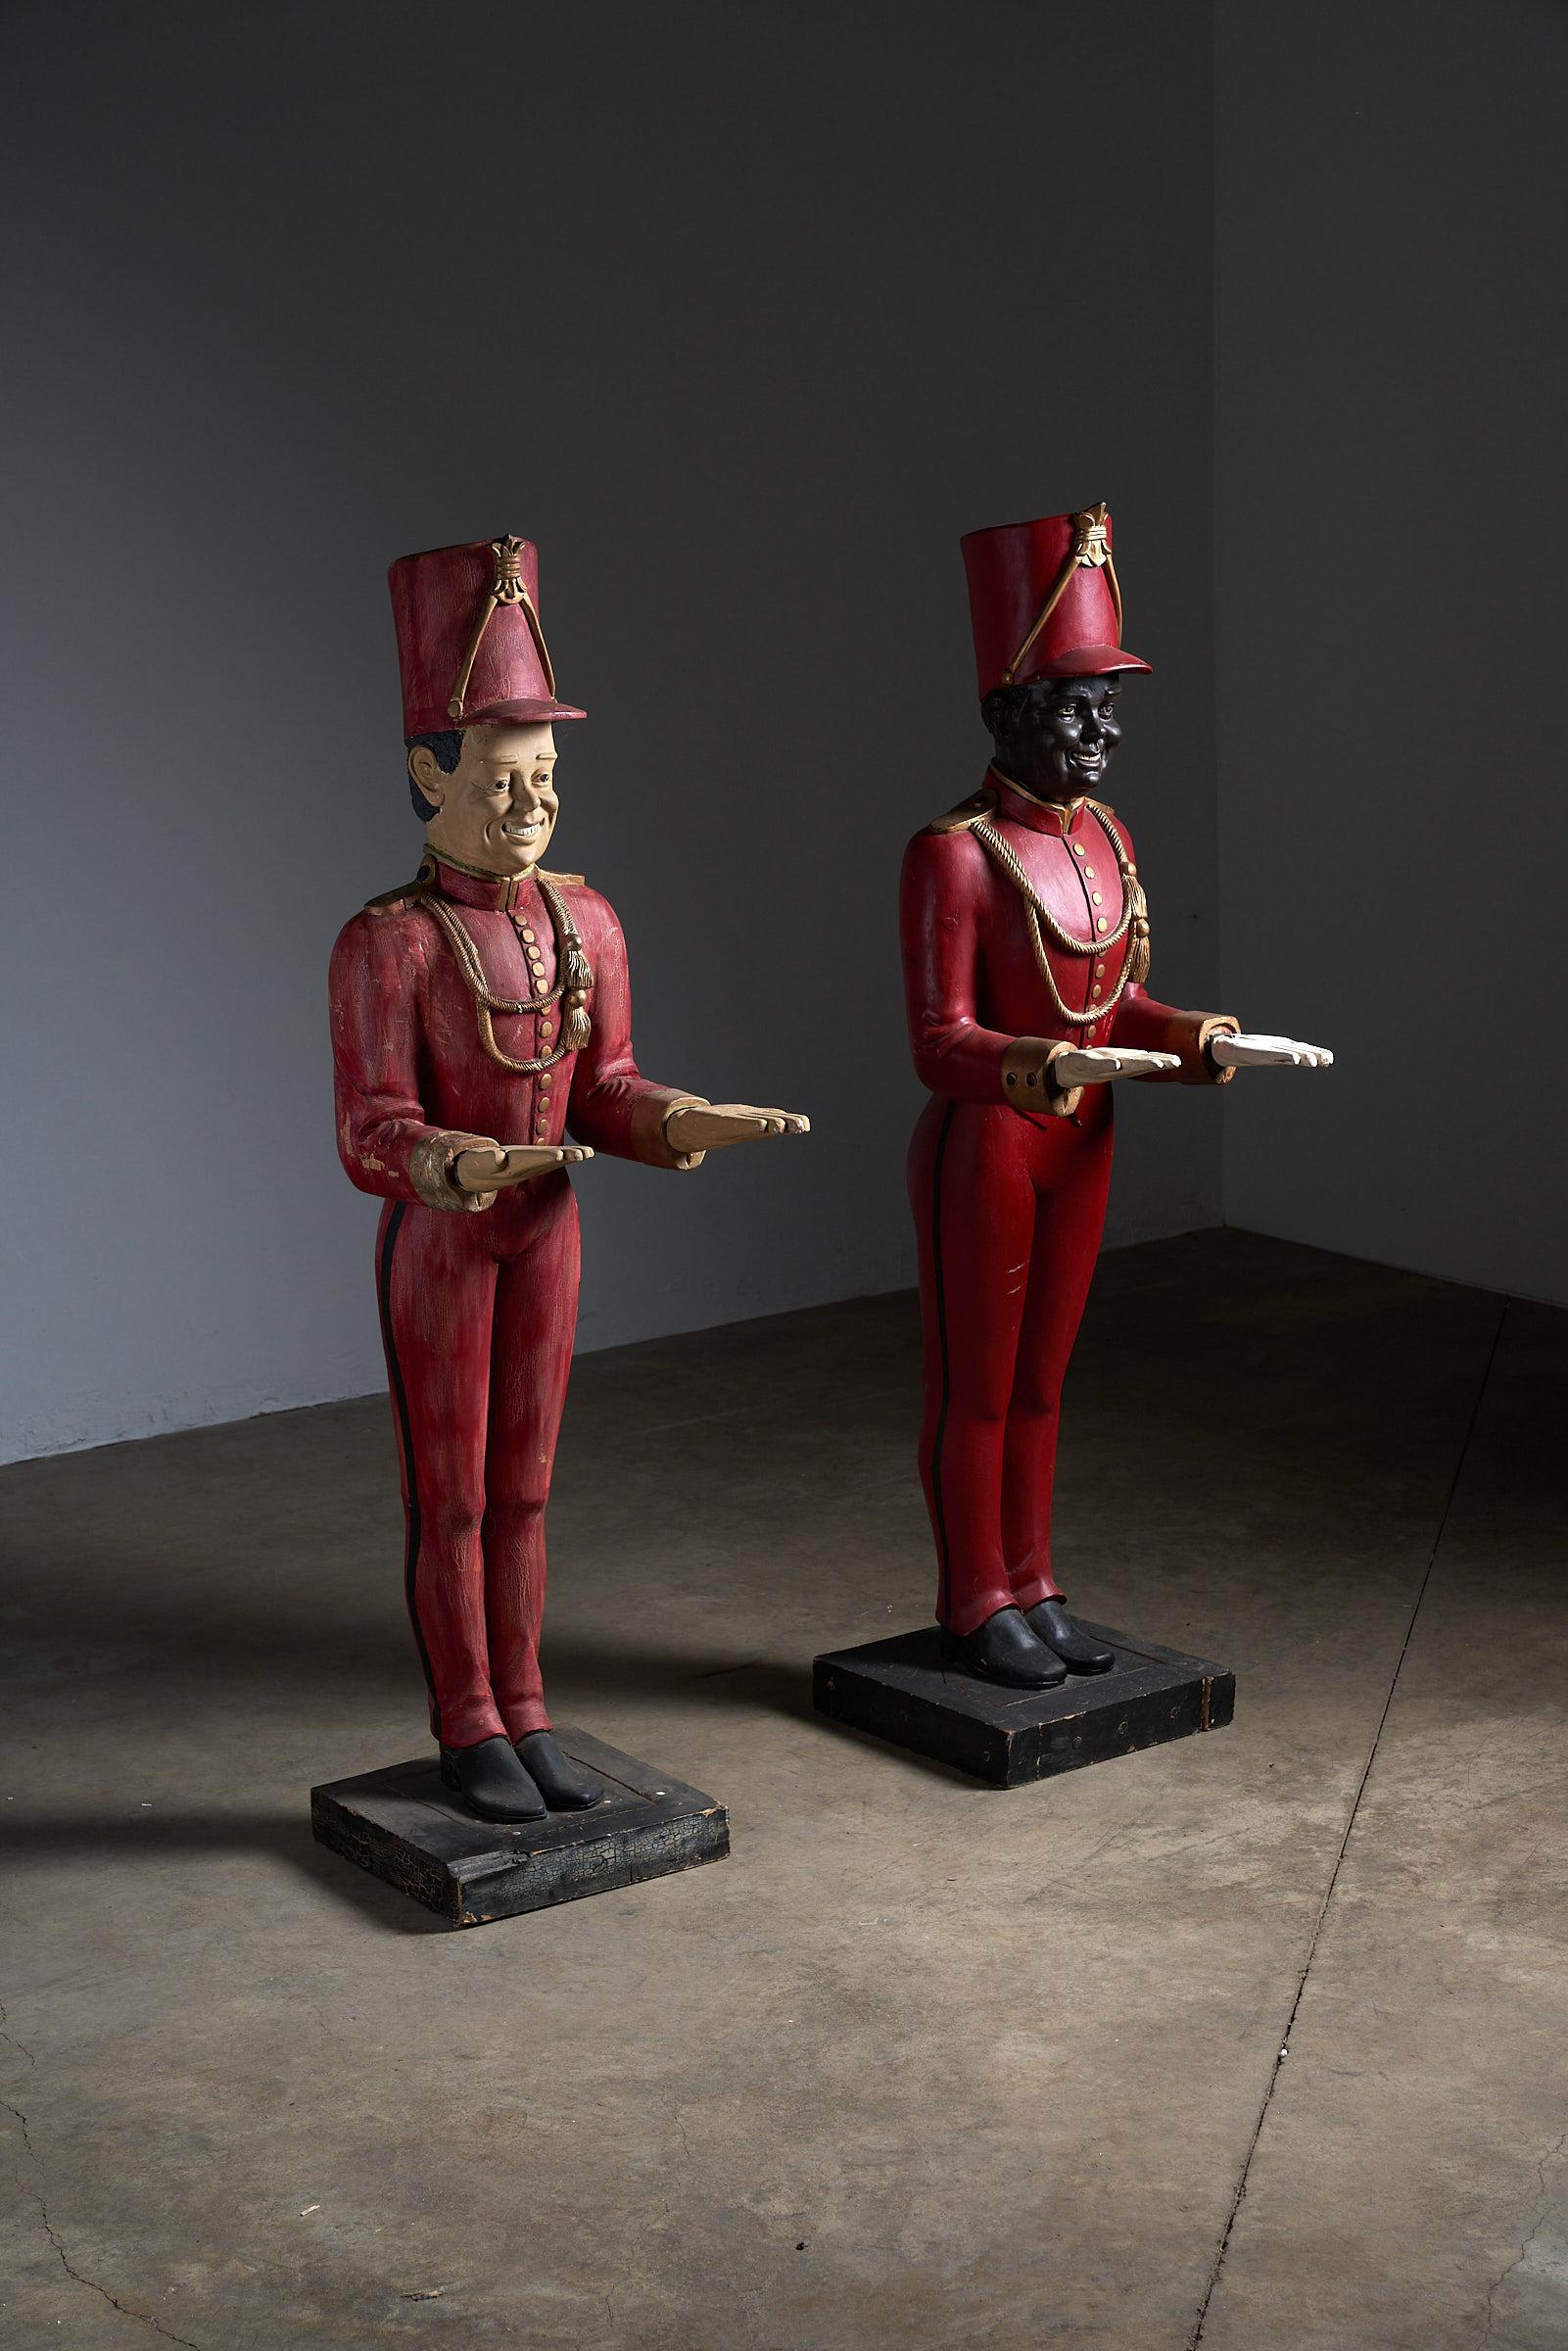 Elevate your decor with this striking antique wooden servant figures, crafted entirely from wood. Dressed in vibrant red clothing and a matching hat, this remarkable piece exudes both charm and craftsmanship. While it stands out as a captivating